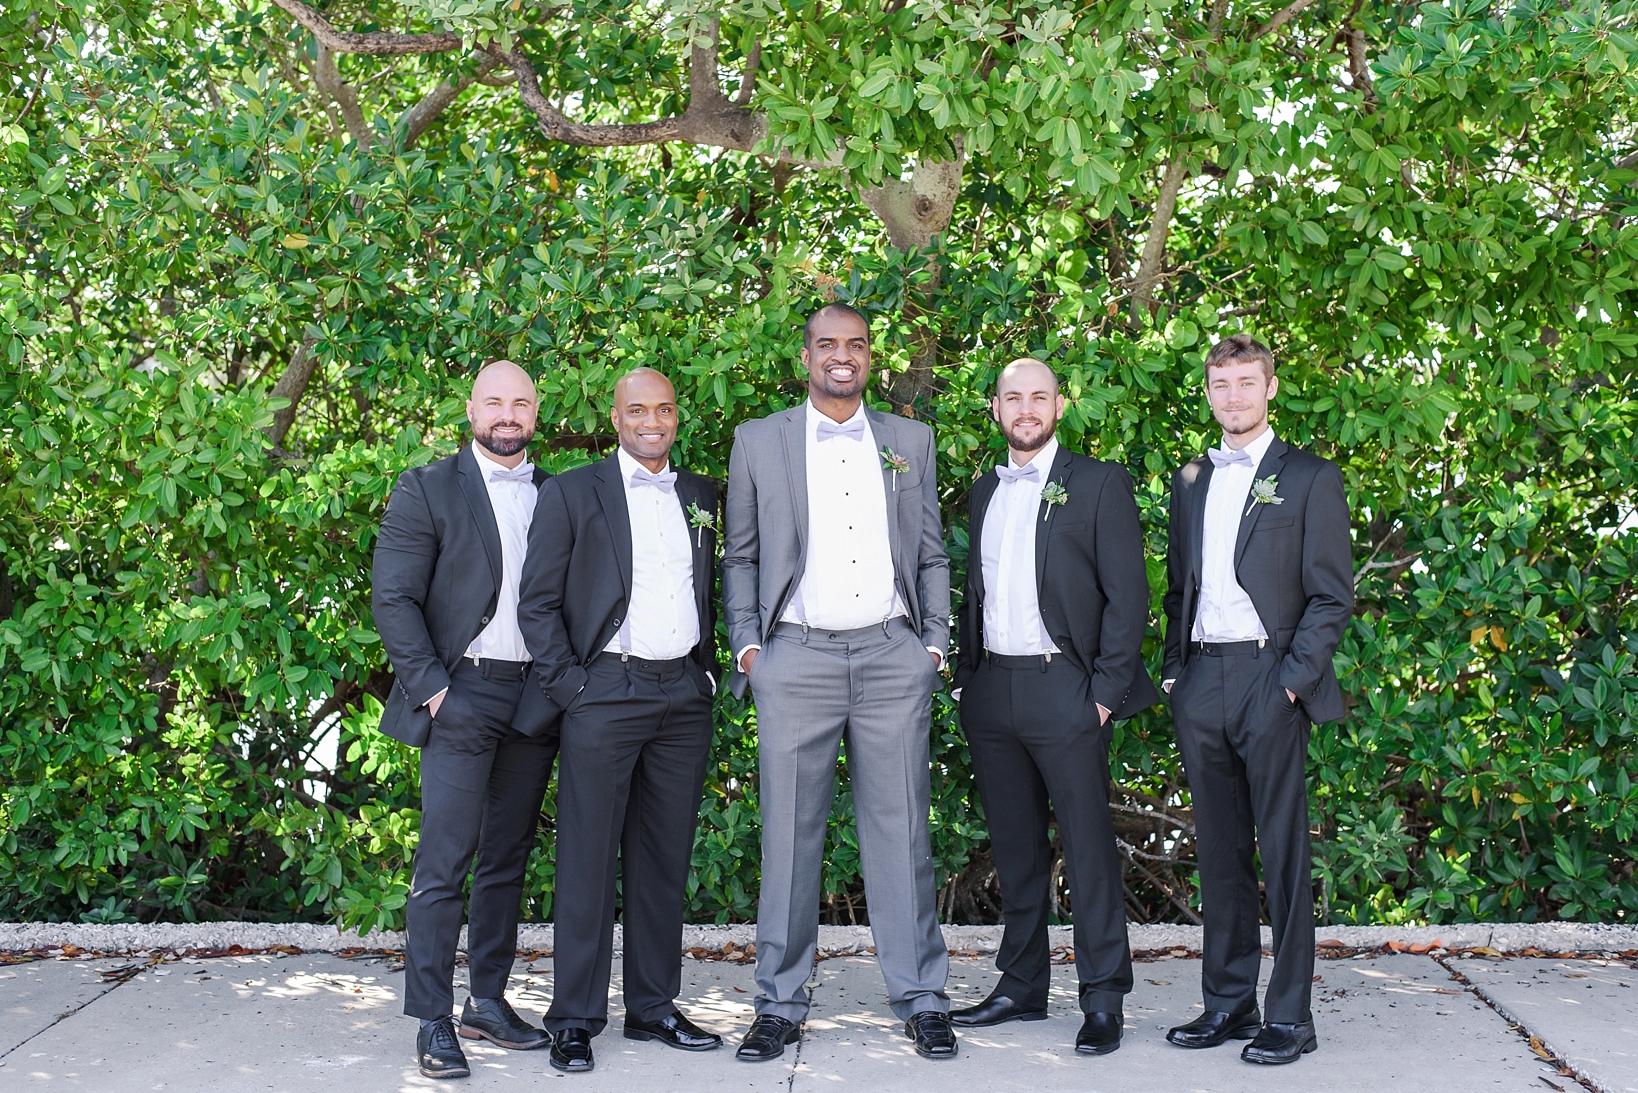 Groom and Groomsmen in front of greenery